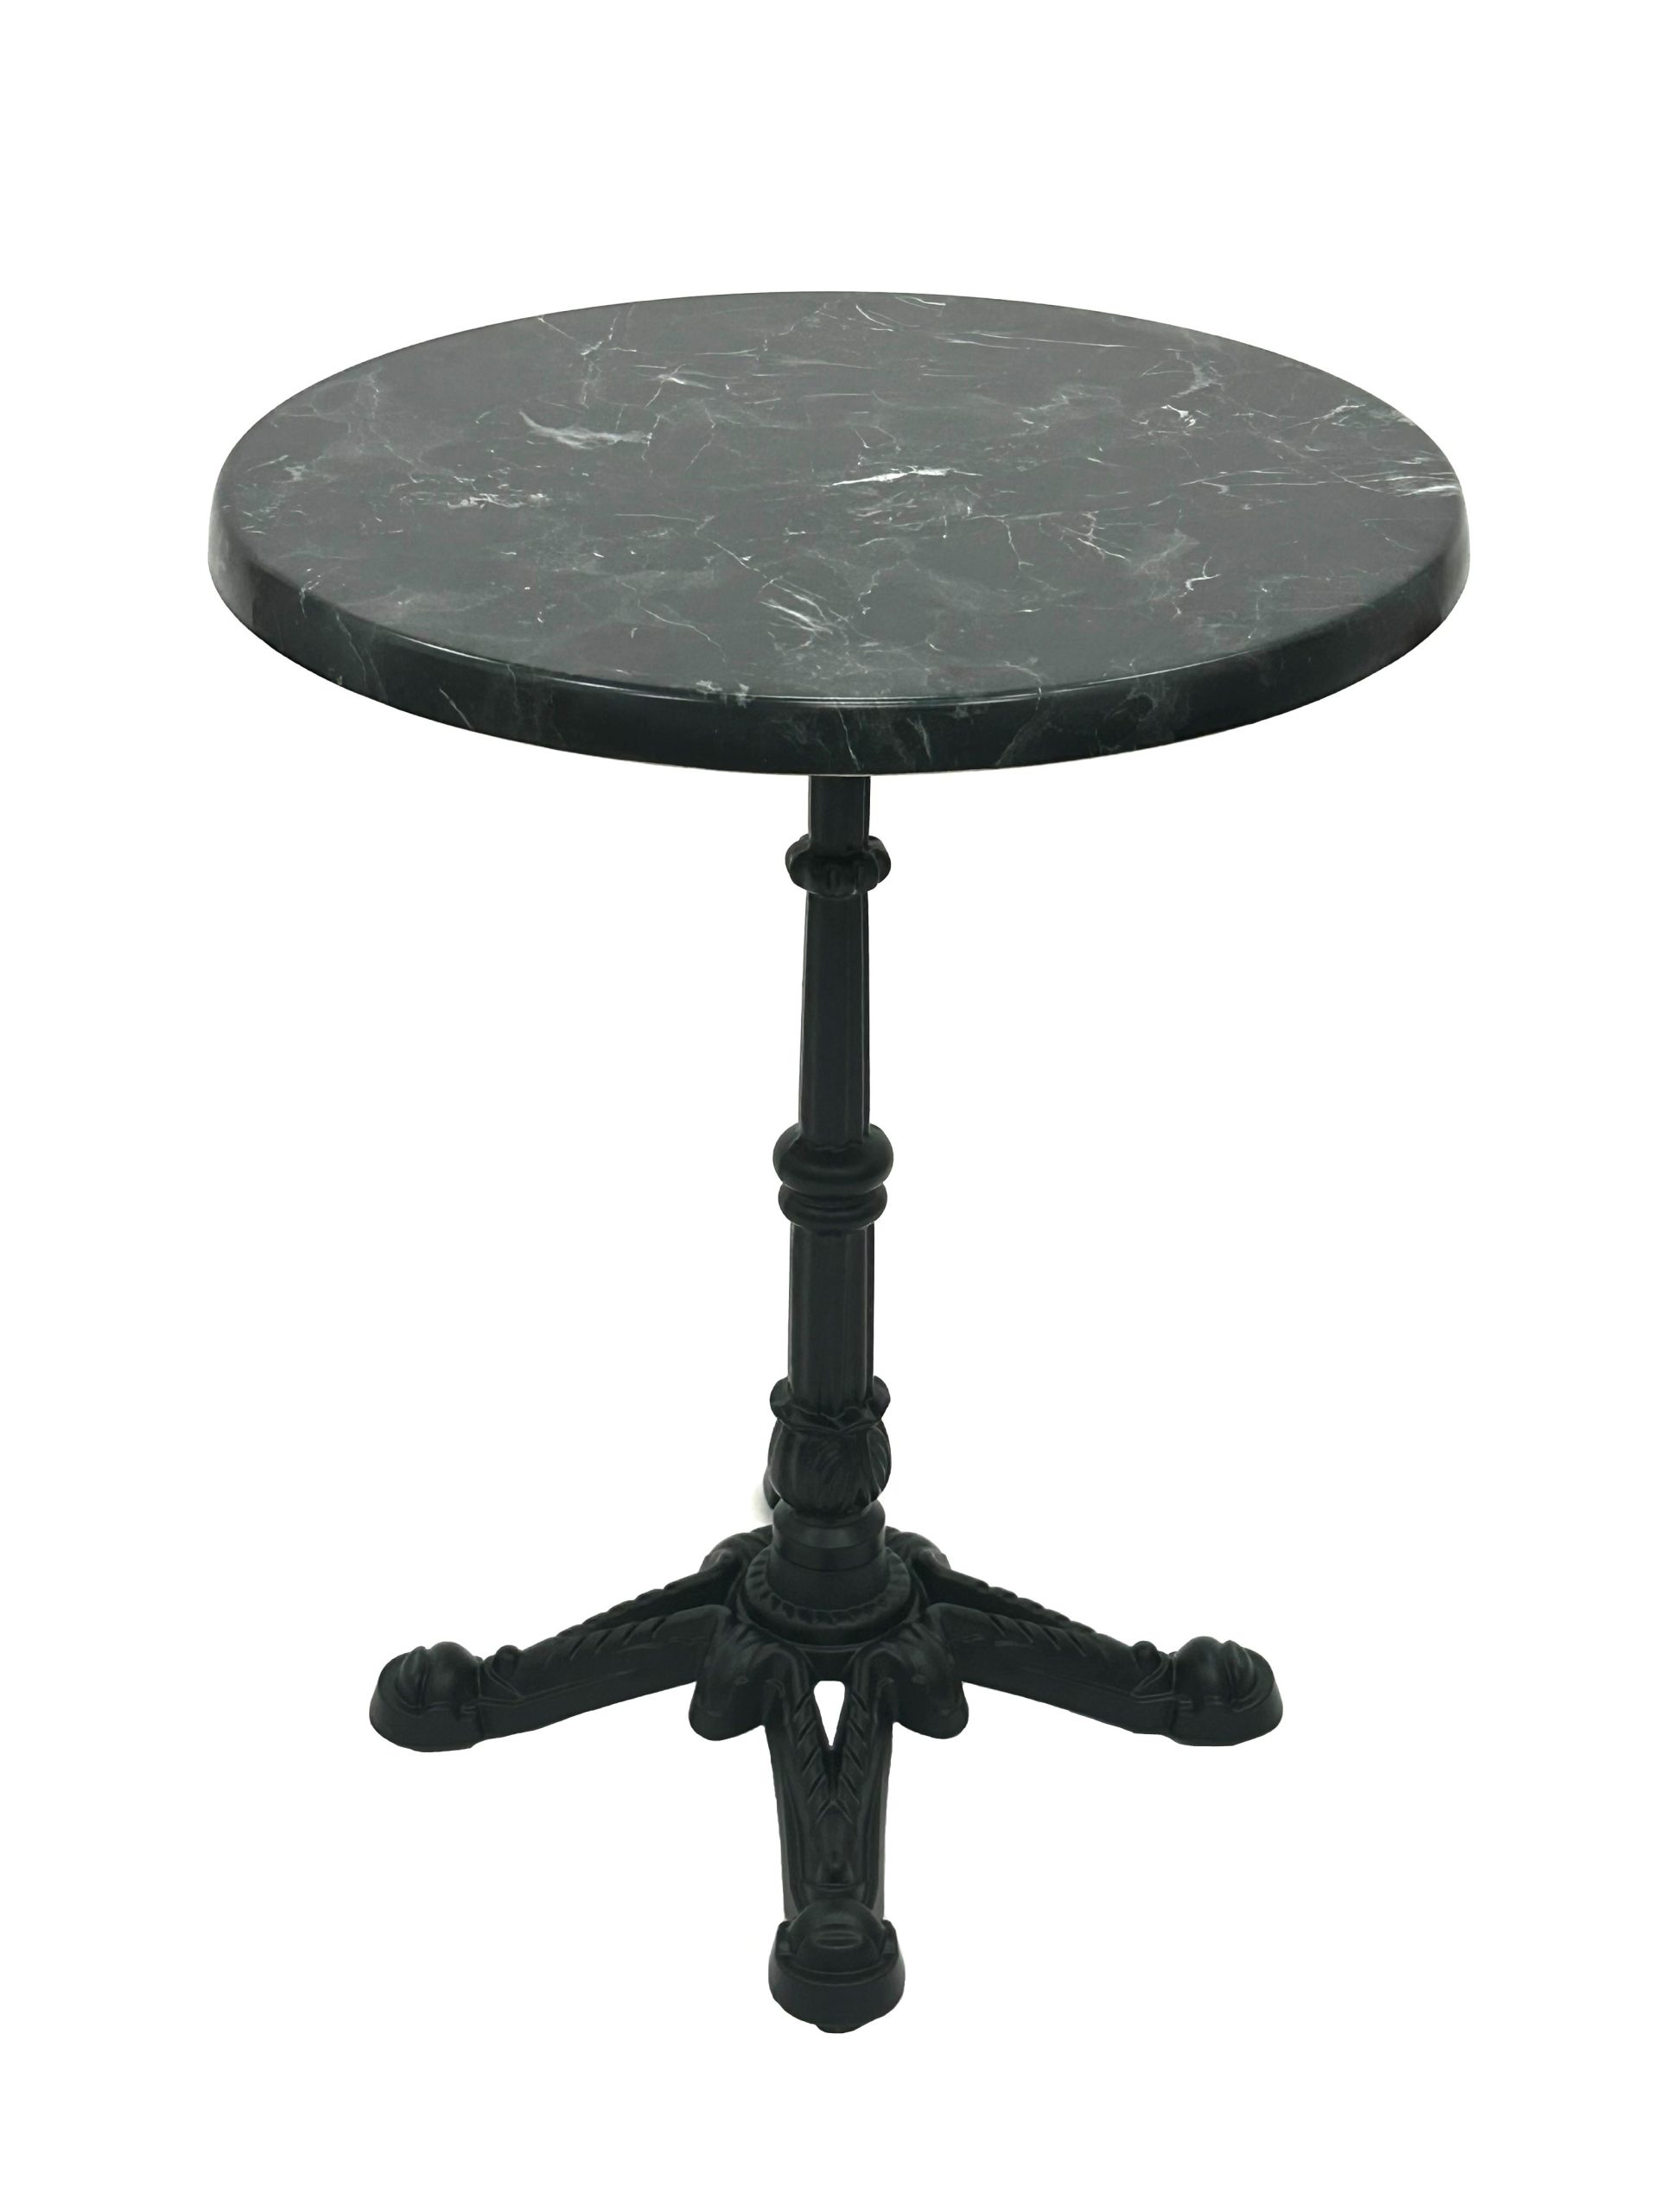 UK Suppliers Of High Quality Estoril Bistro Tables